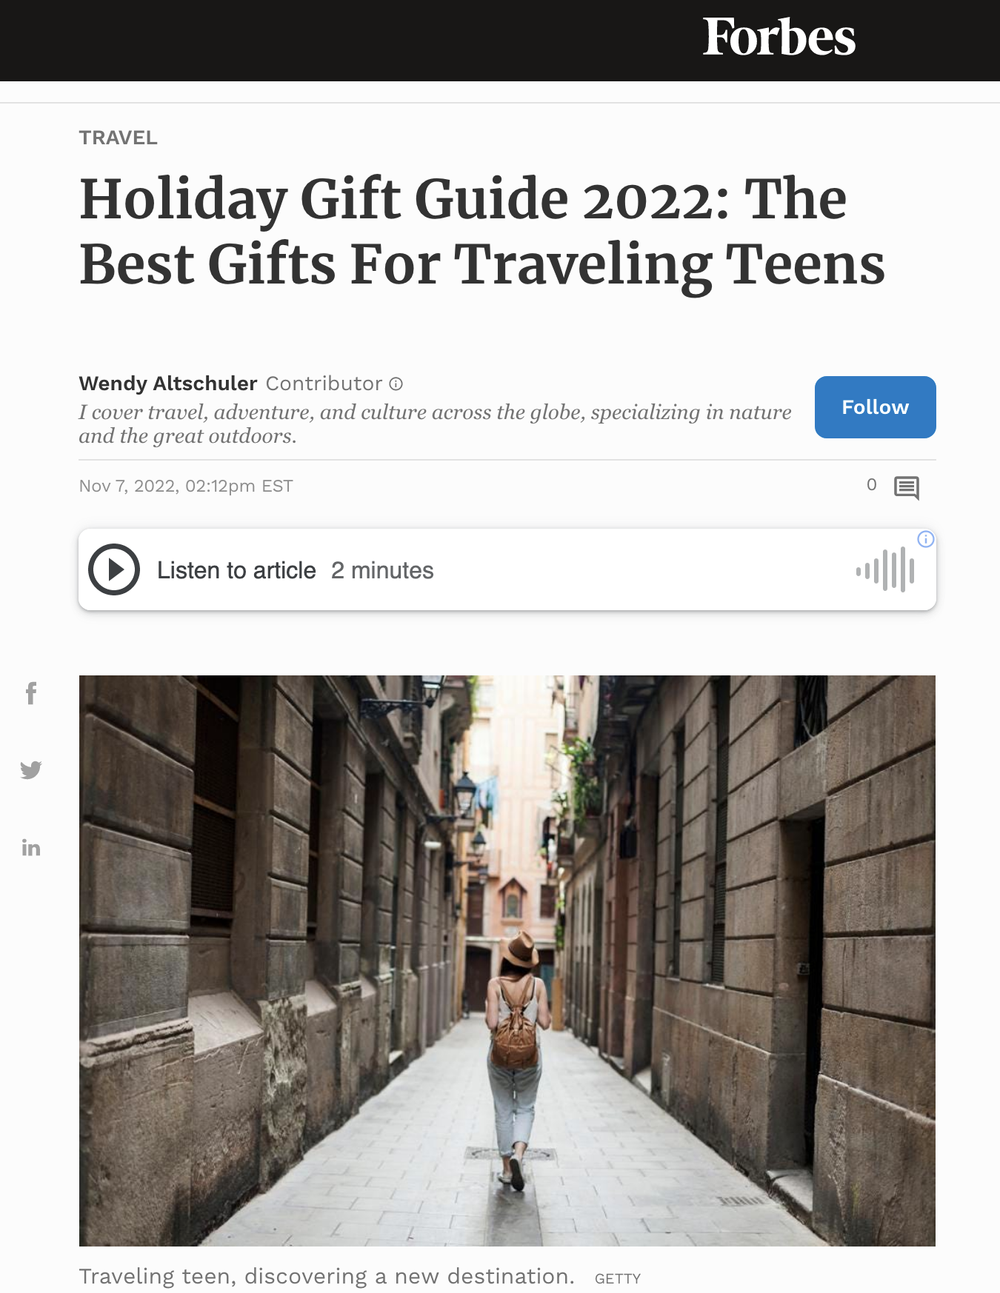 Holiday Gift Guide 2022: The Best Gifts For Traveling Teens